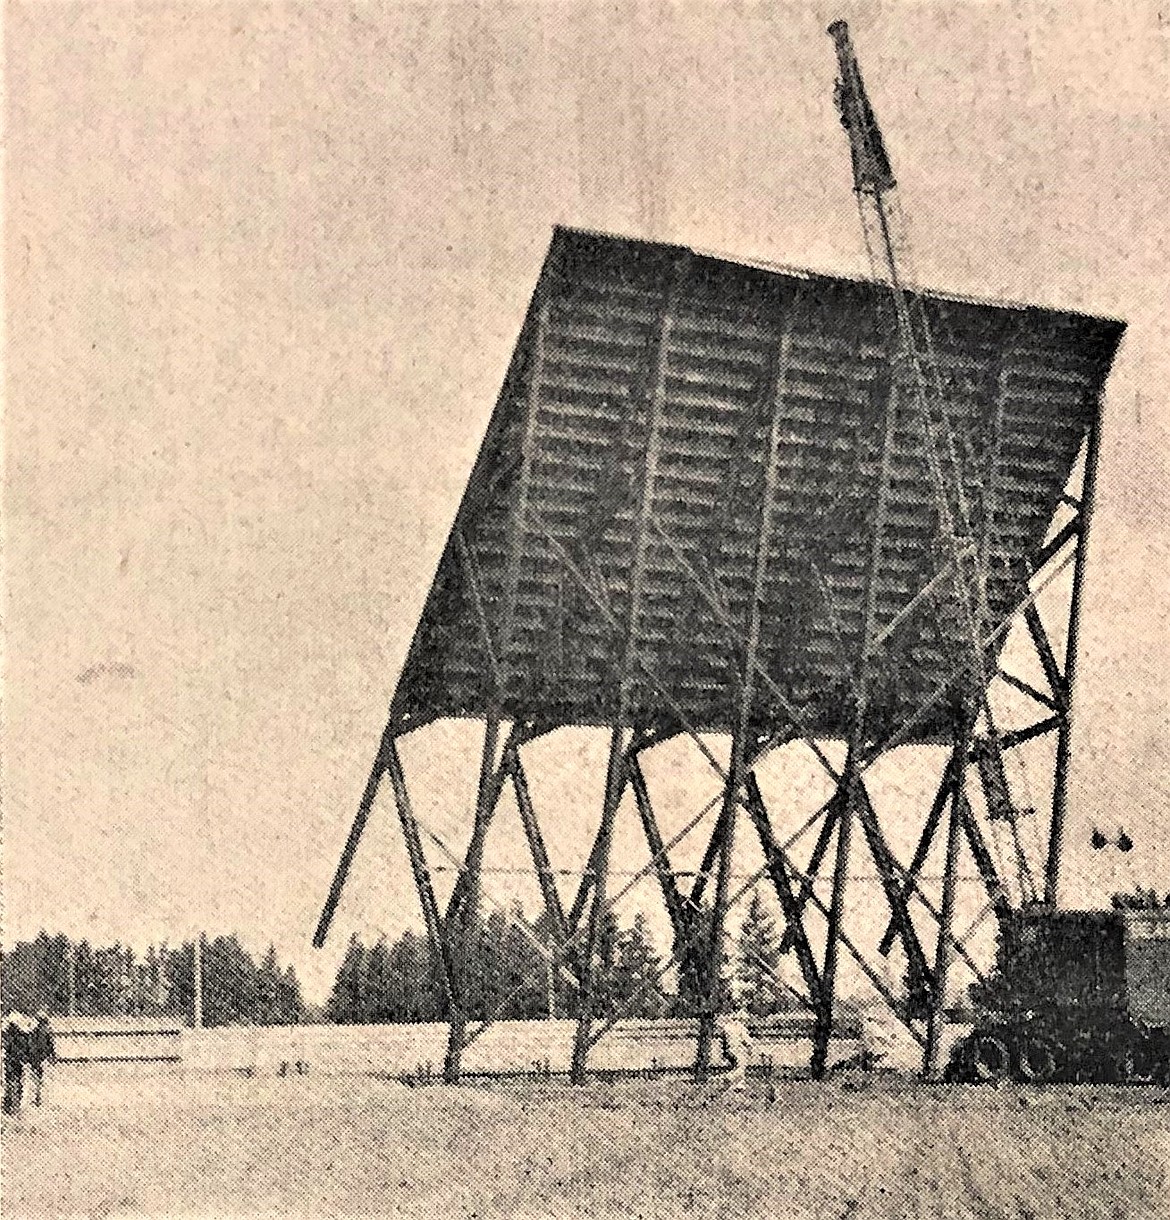 Harley Hudson and a friend (lower left) watch as a crane lifts the 20-ton, Coeur d’Alene Drive-in screen into place.